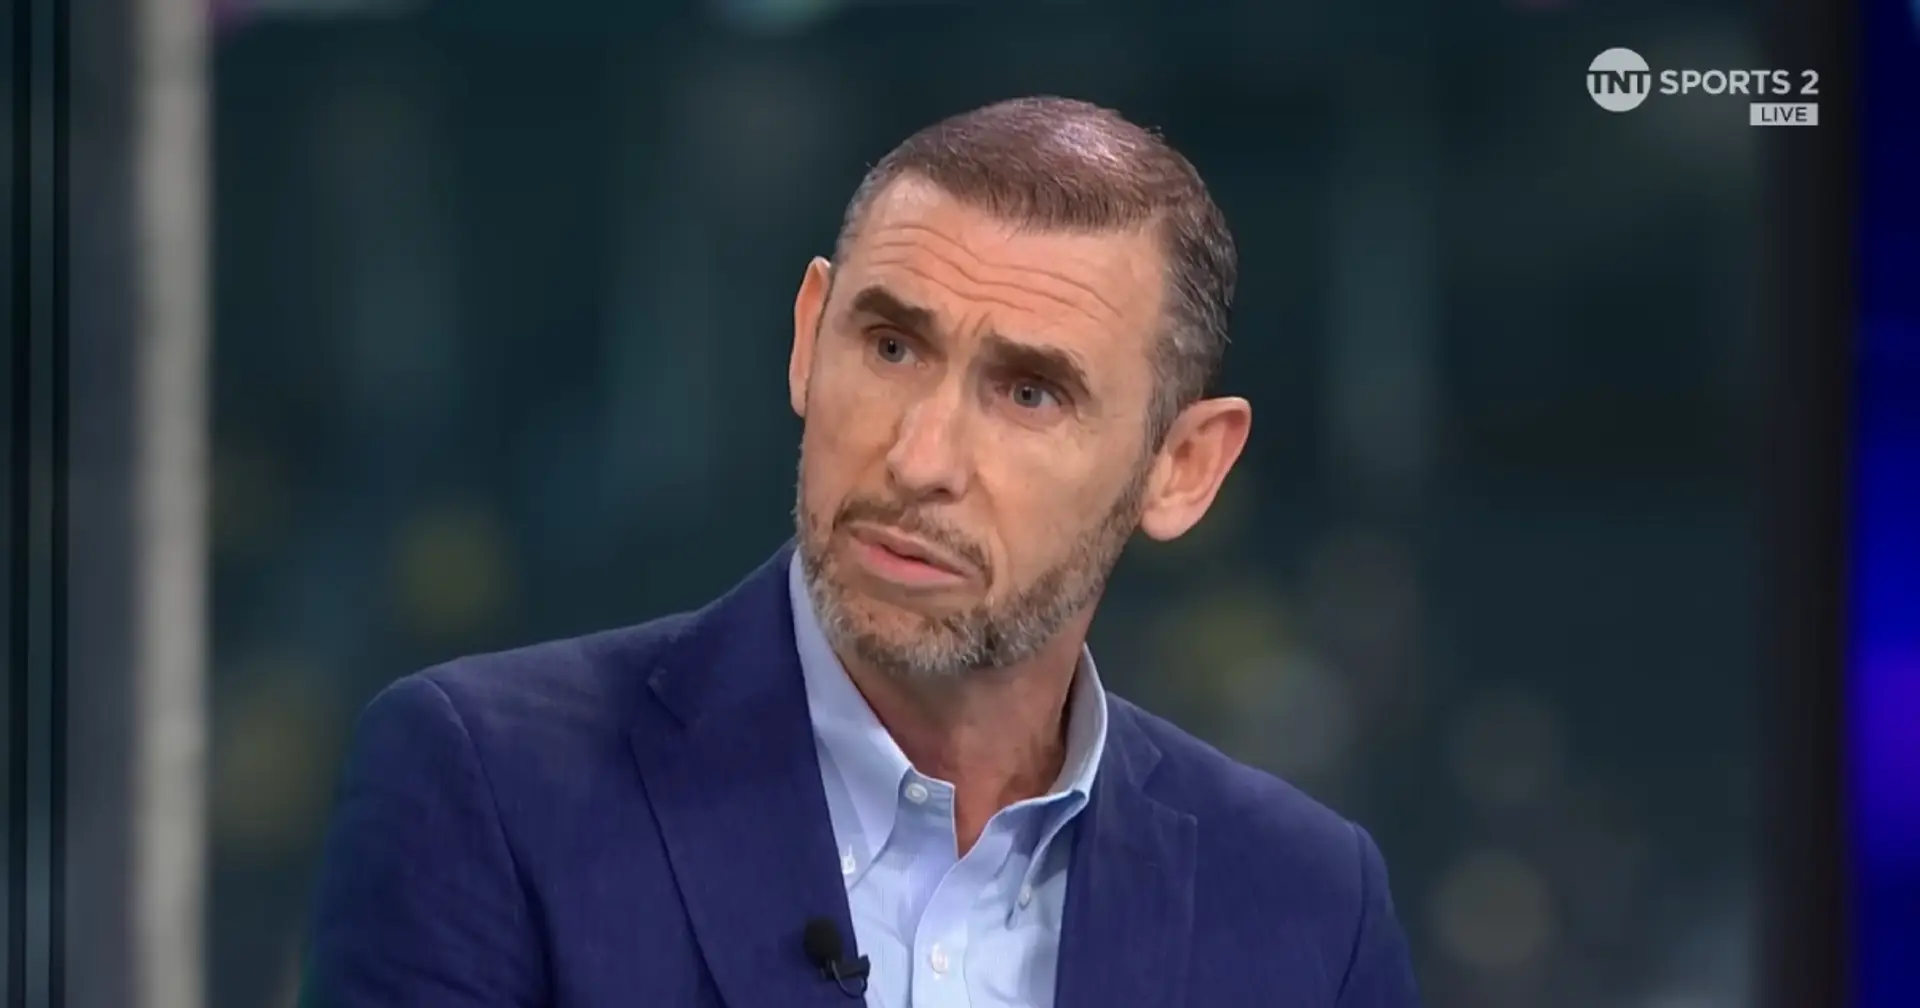 'I'm putting it out there': Martin Keown explains what Arsenal's win vs Porto means in Premier League title race